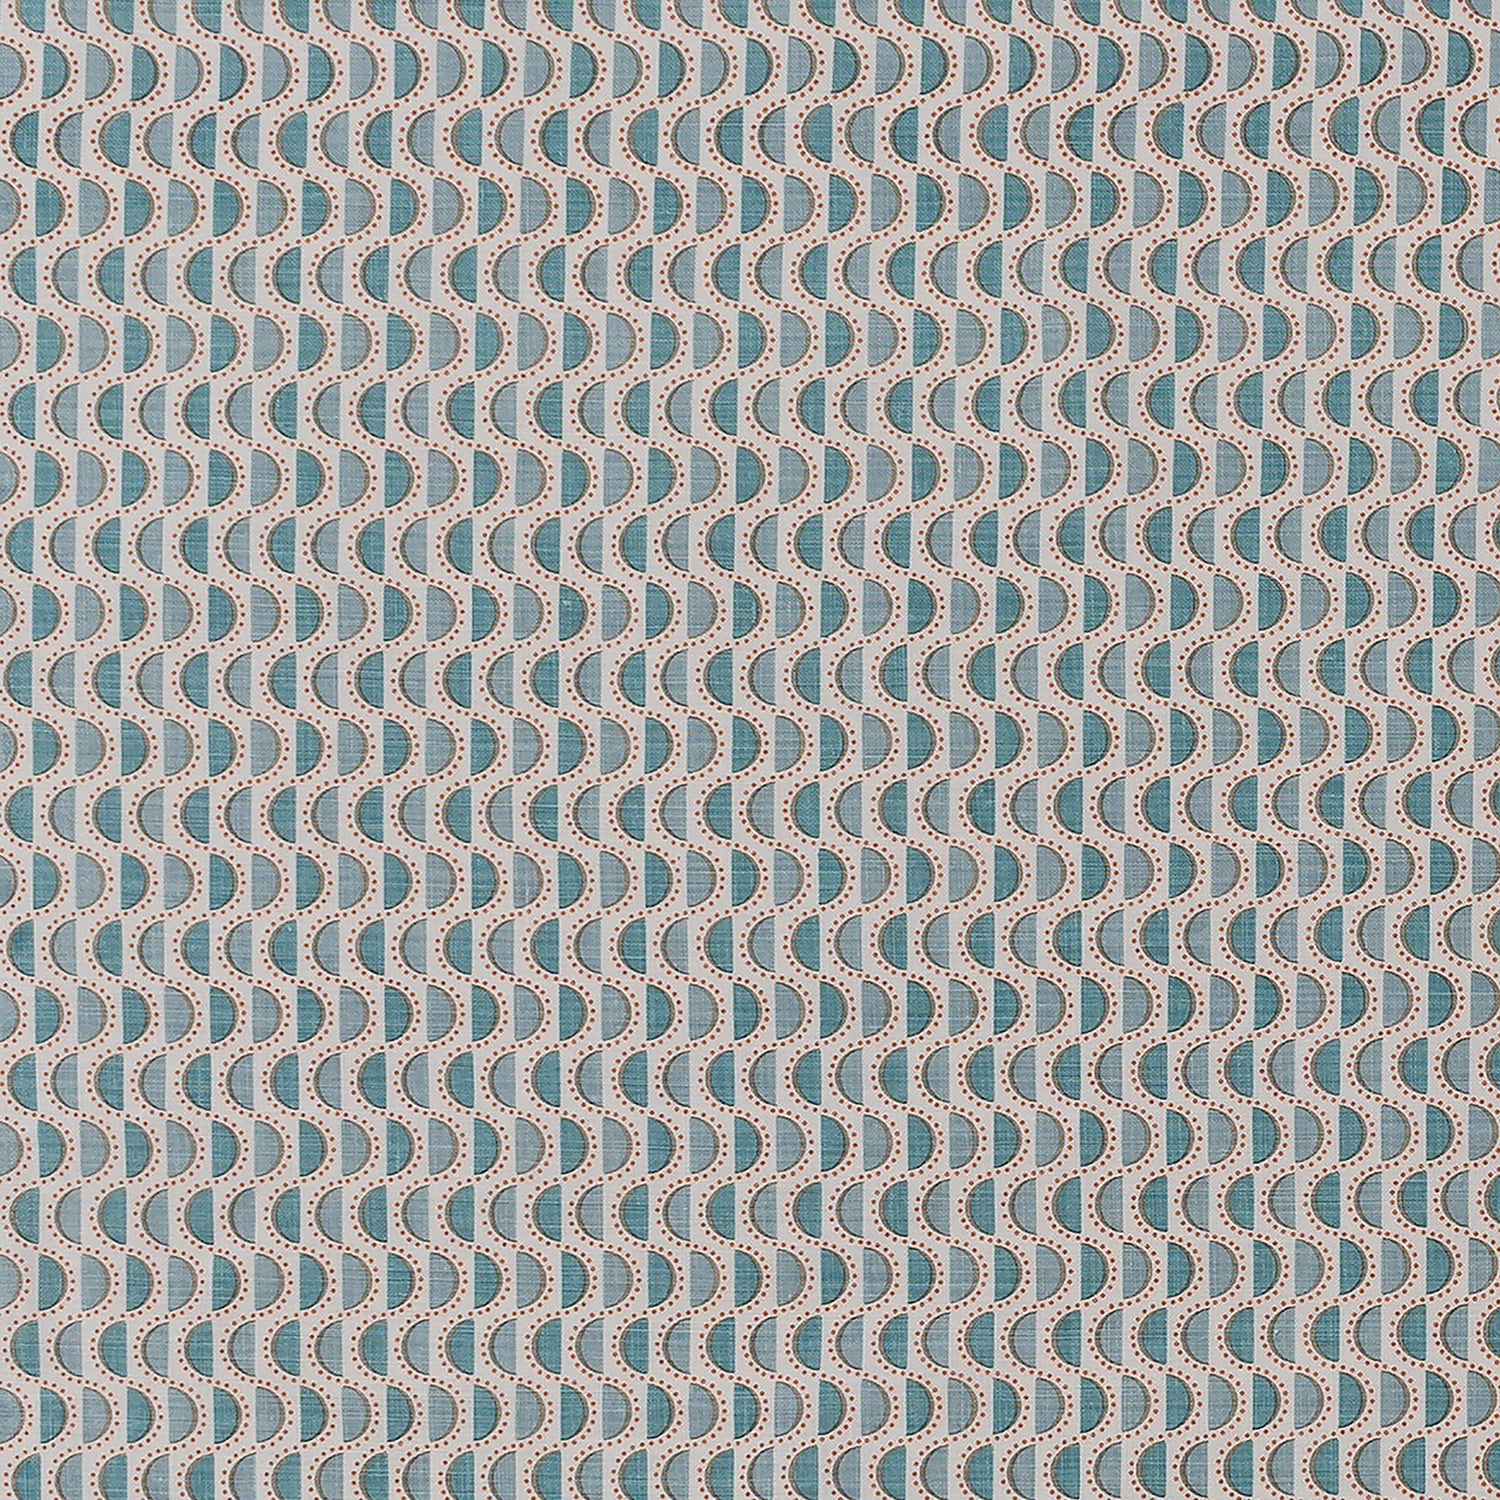 Fabric in a linear geometric print in shades of blue and red on a light gray field.